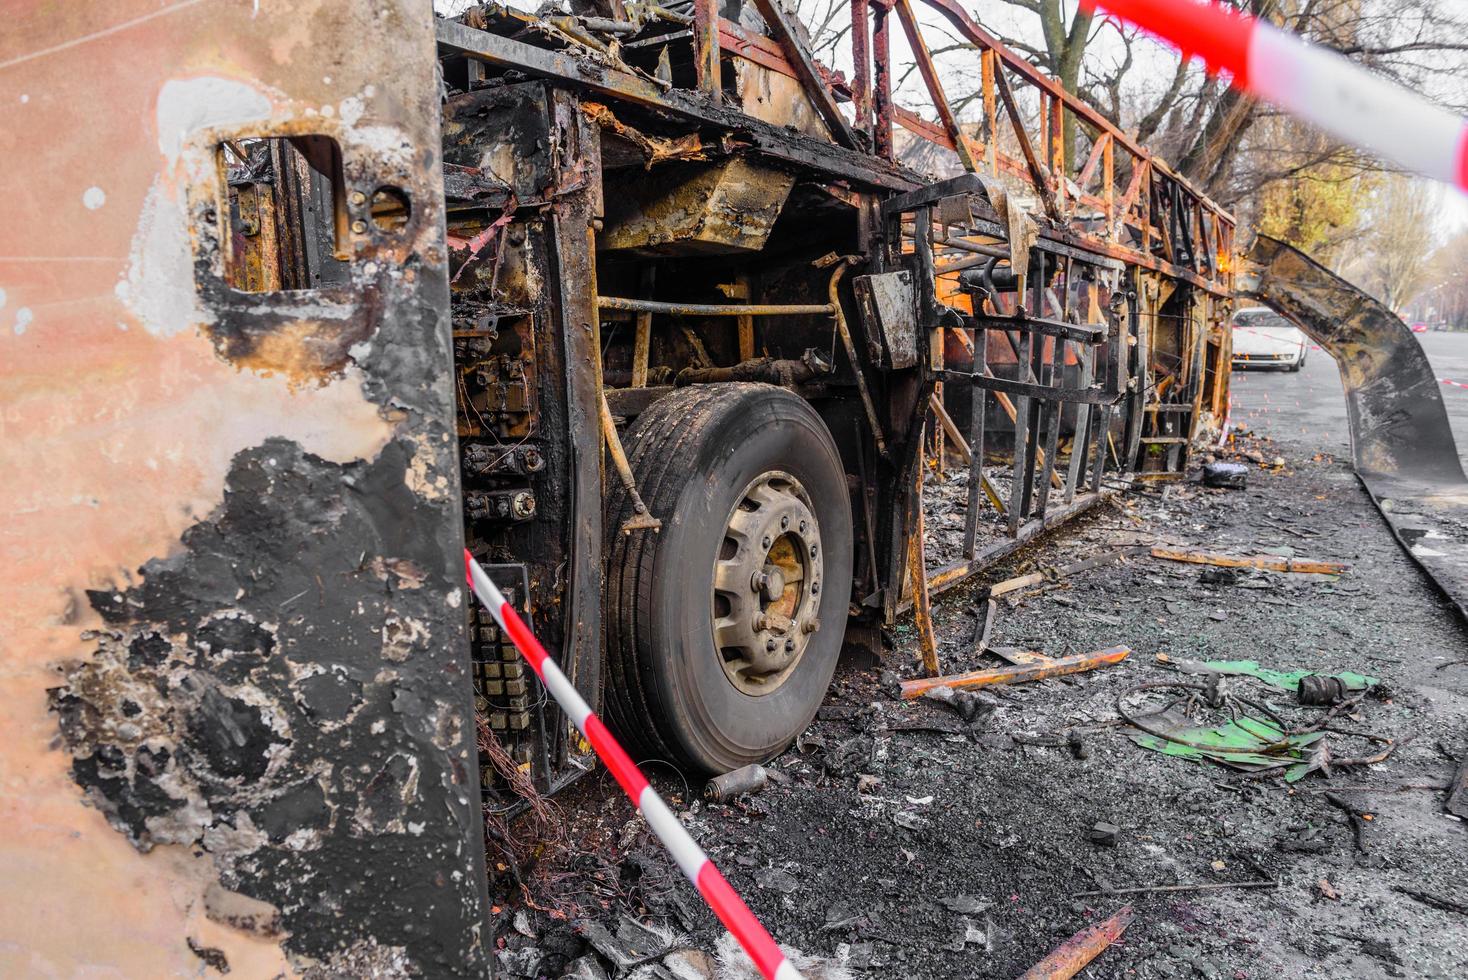 Burnt bus is seen on the street after caught in fire during travel, after fire photo